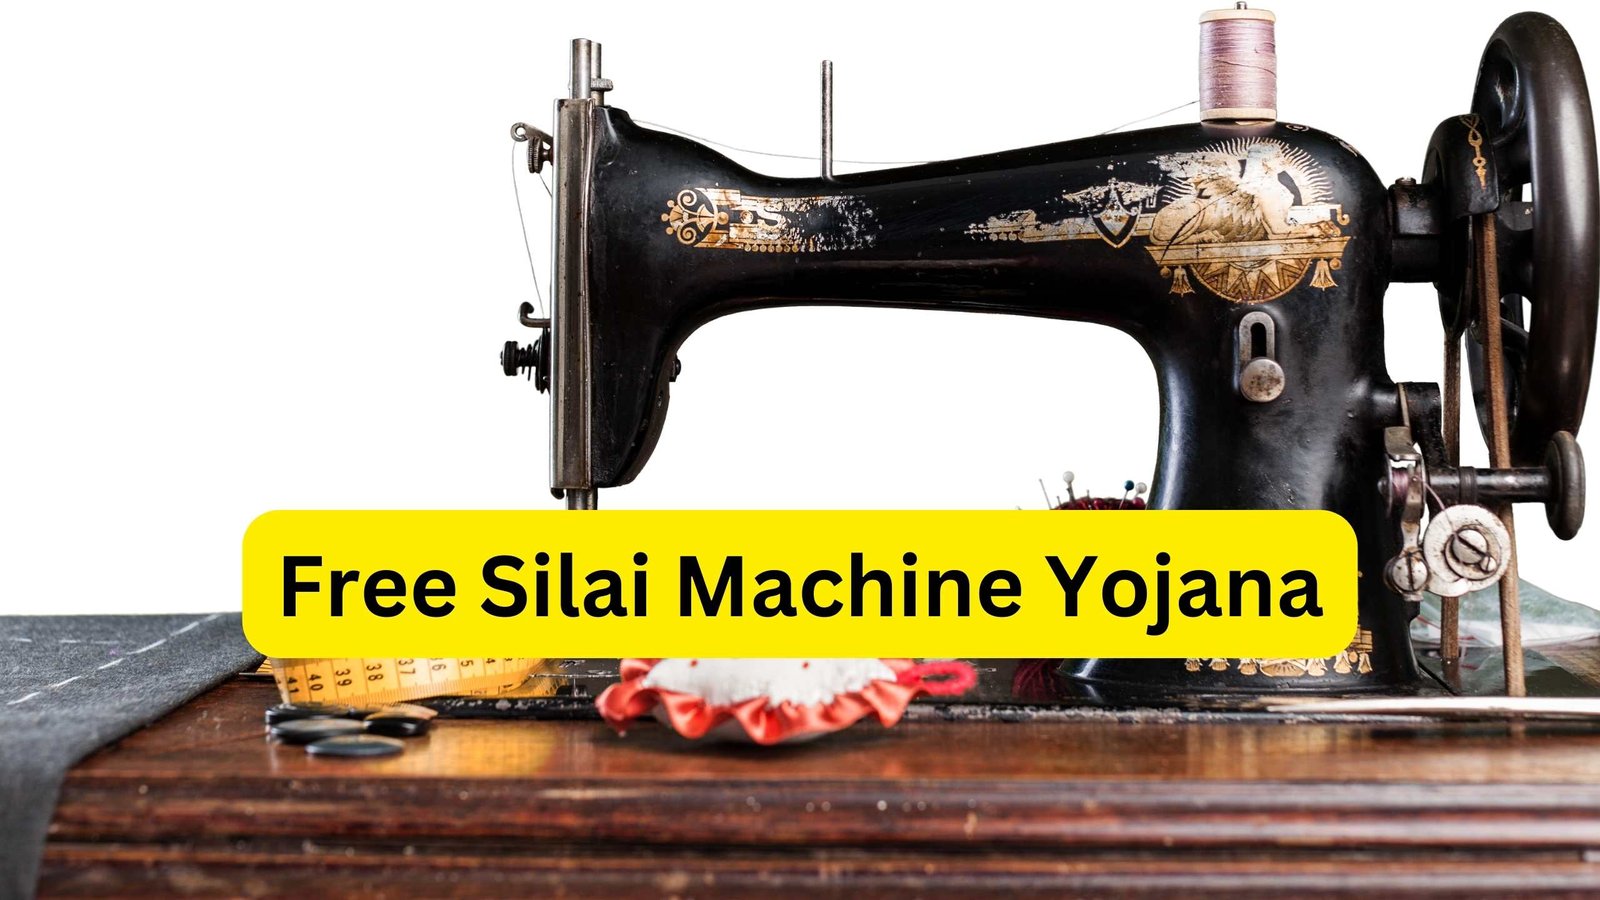 This State Government has Launched the Free Silai Machine Yojana for Women Empowerment